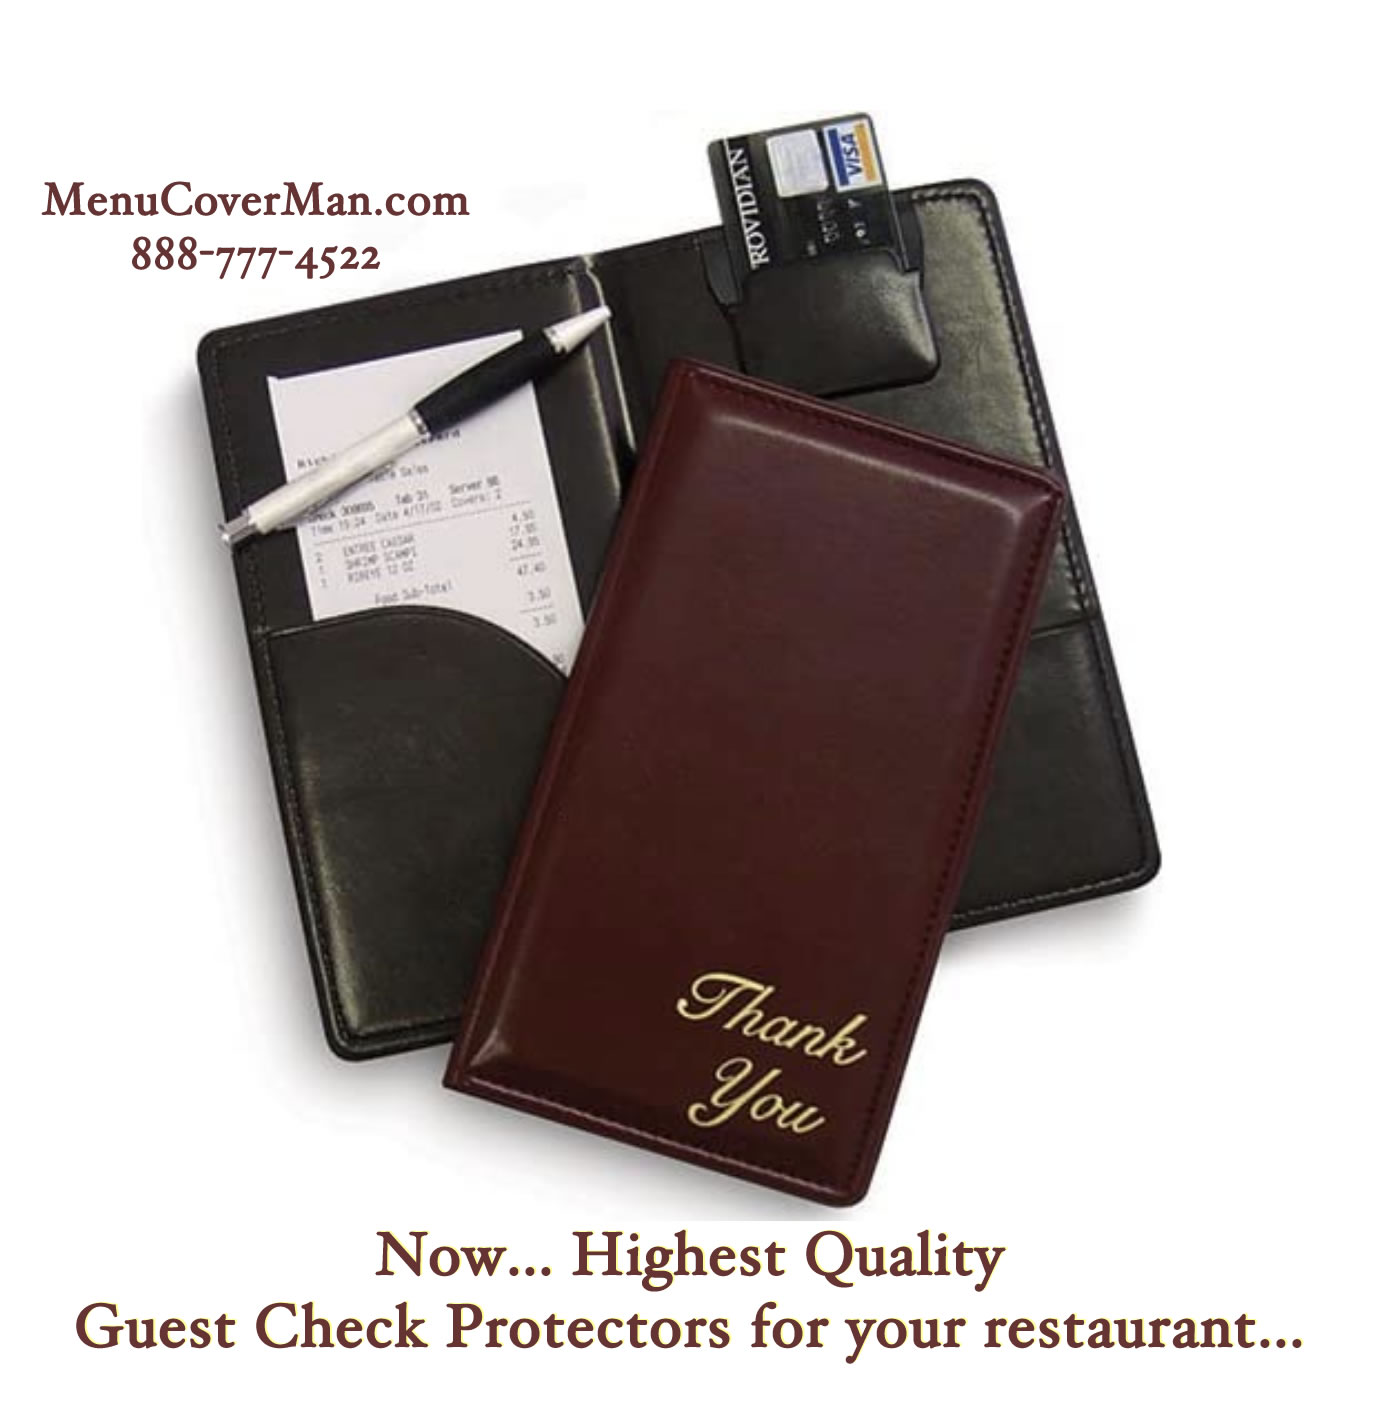 MenuCoverMan Guest Check Presenter - Large and Detailed View of an Excellent Product.